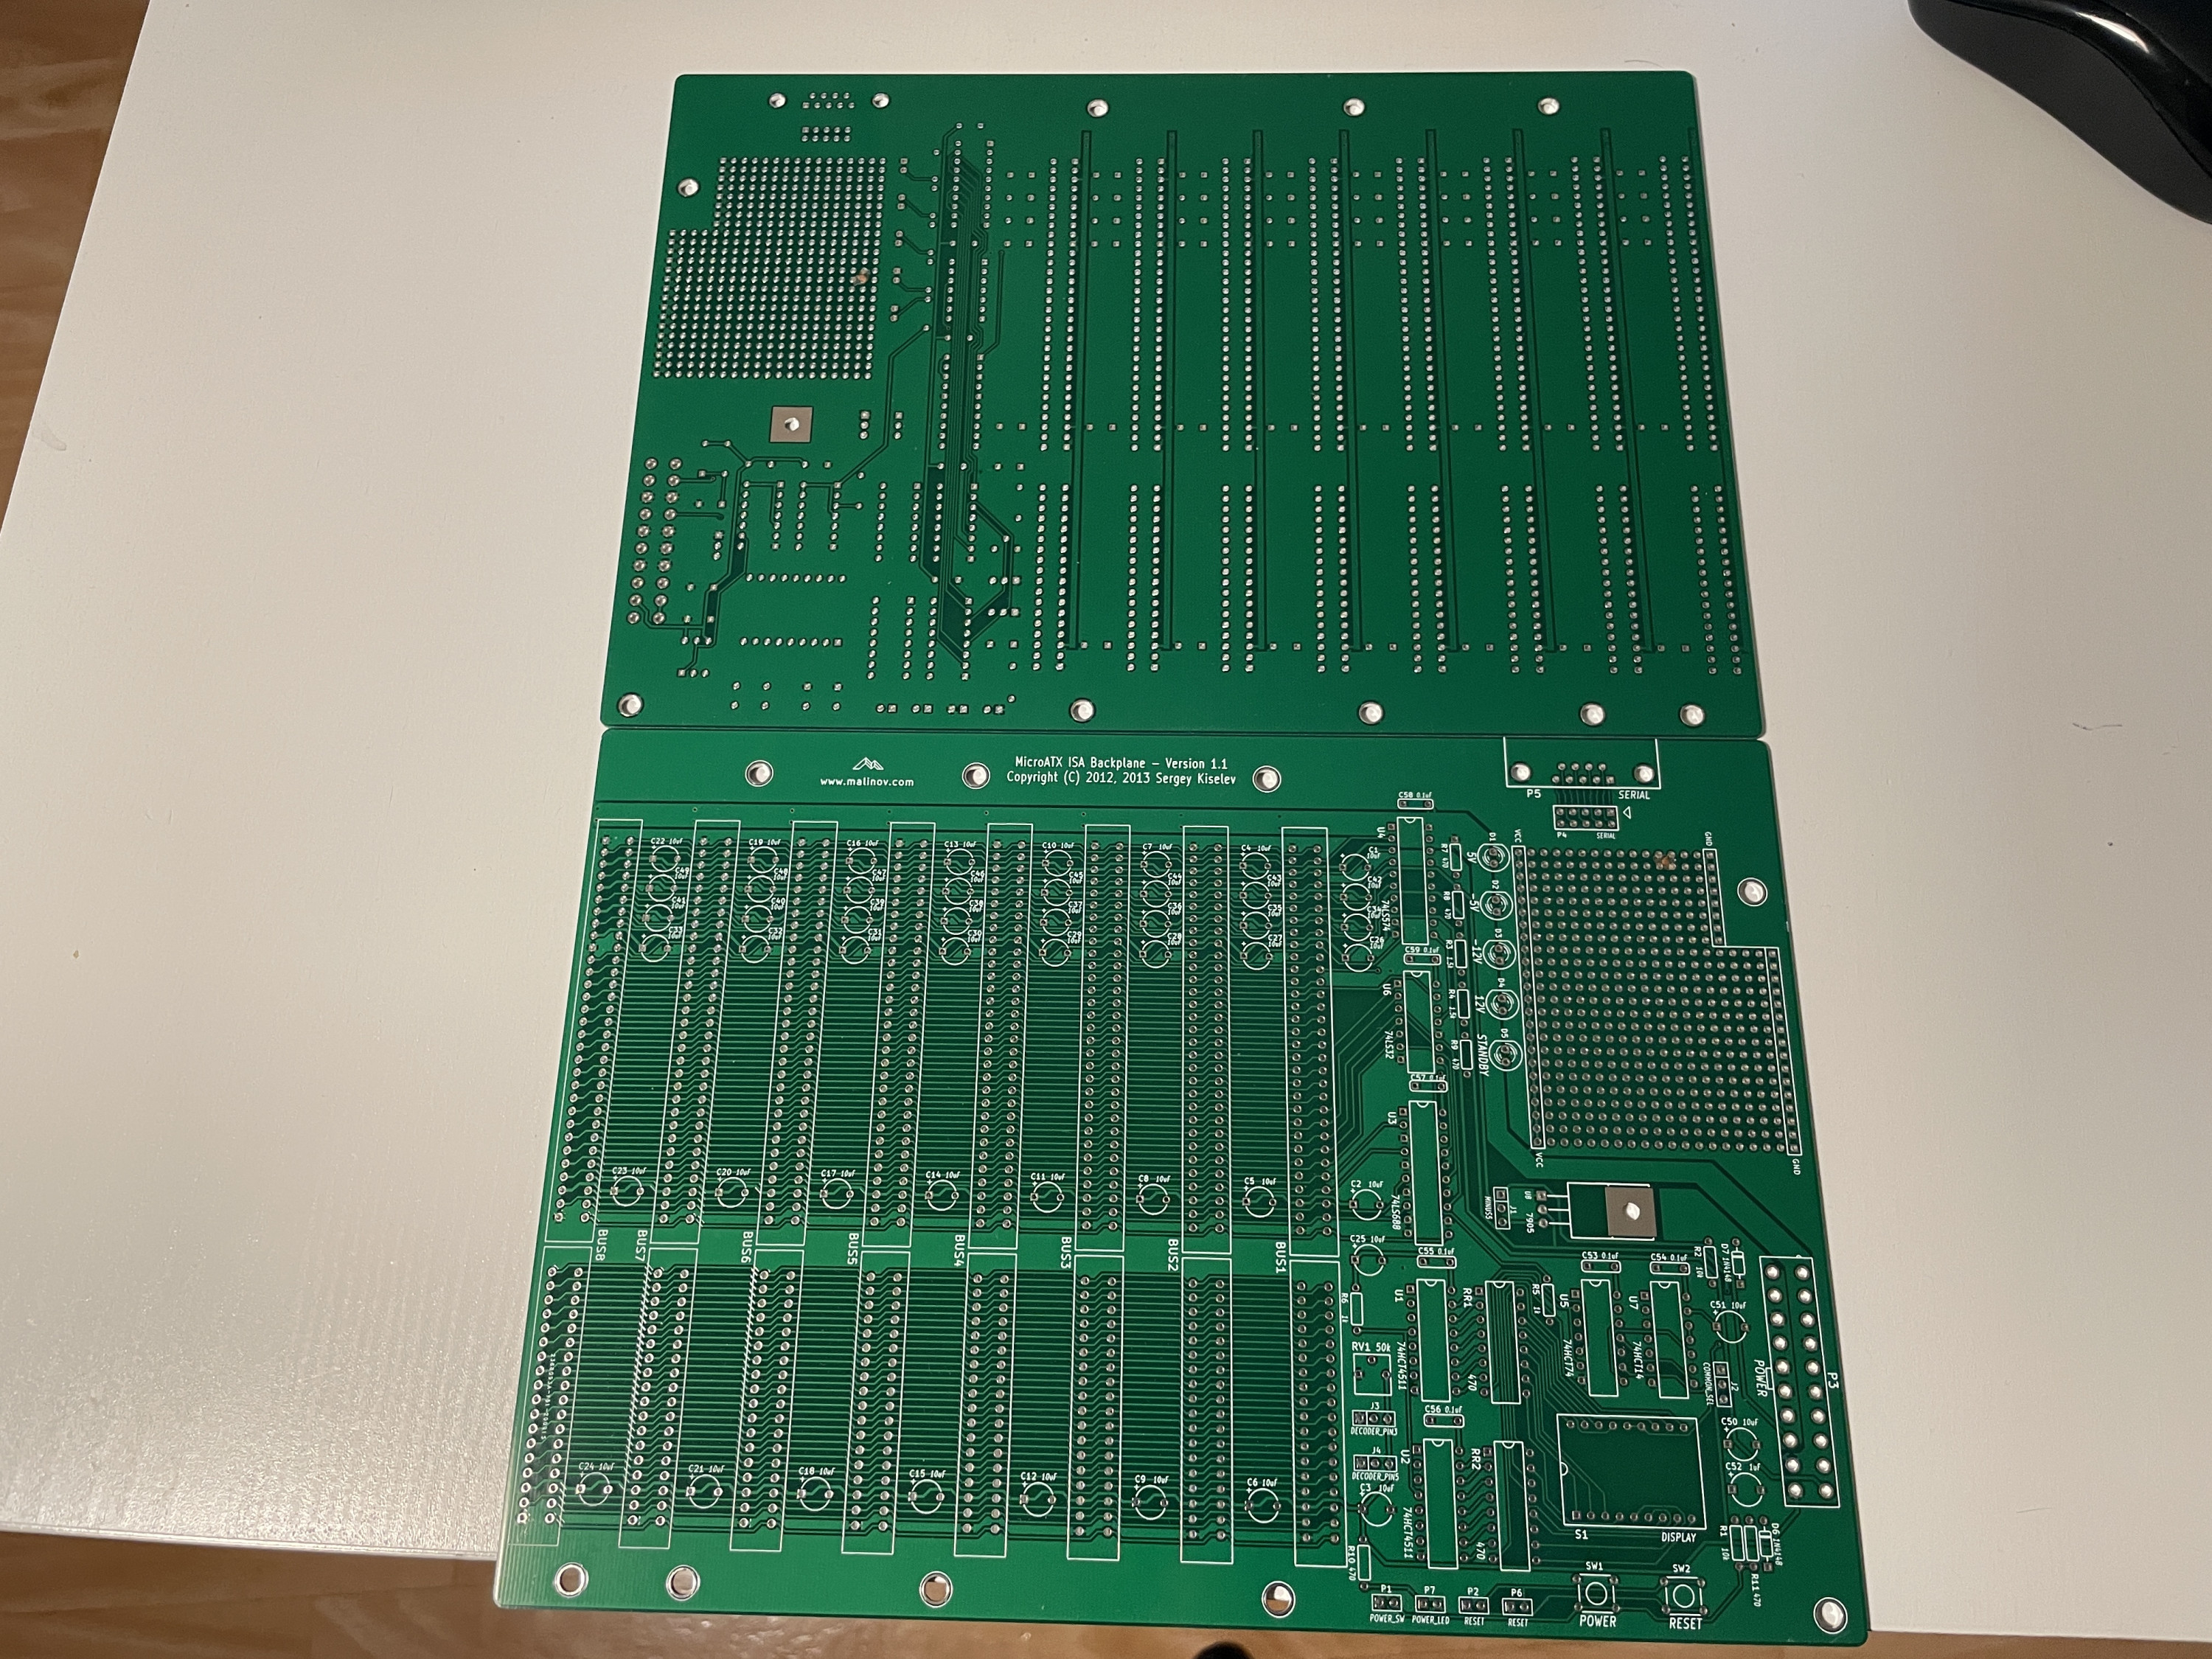 Plain backplane PCBs, not yet populated